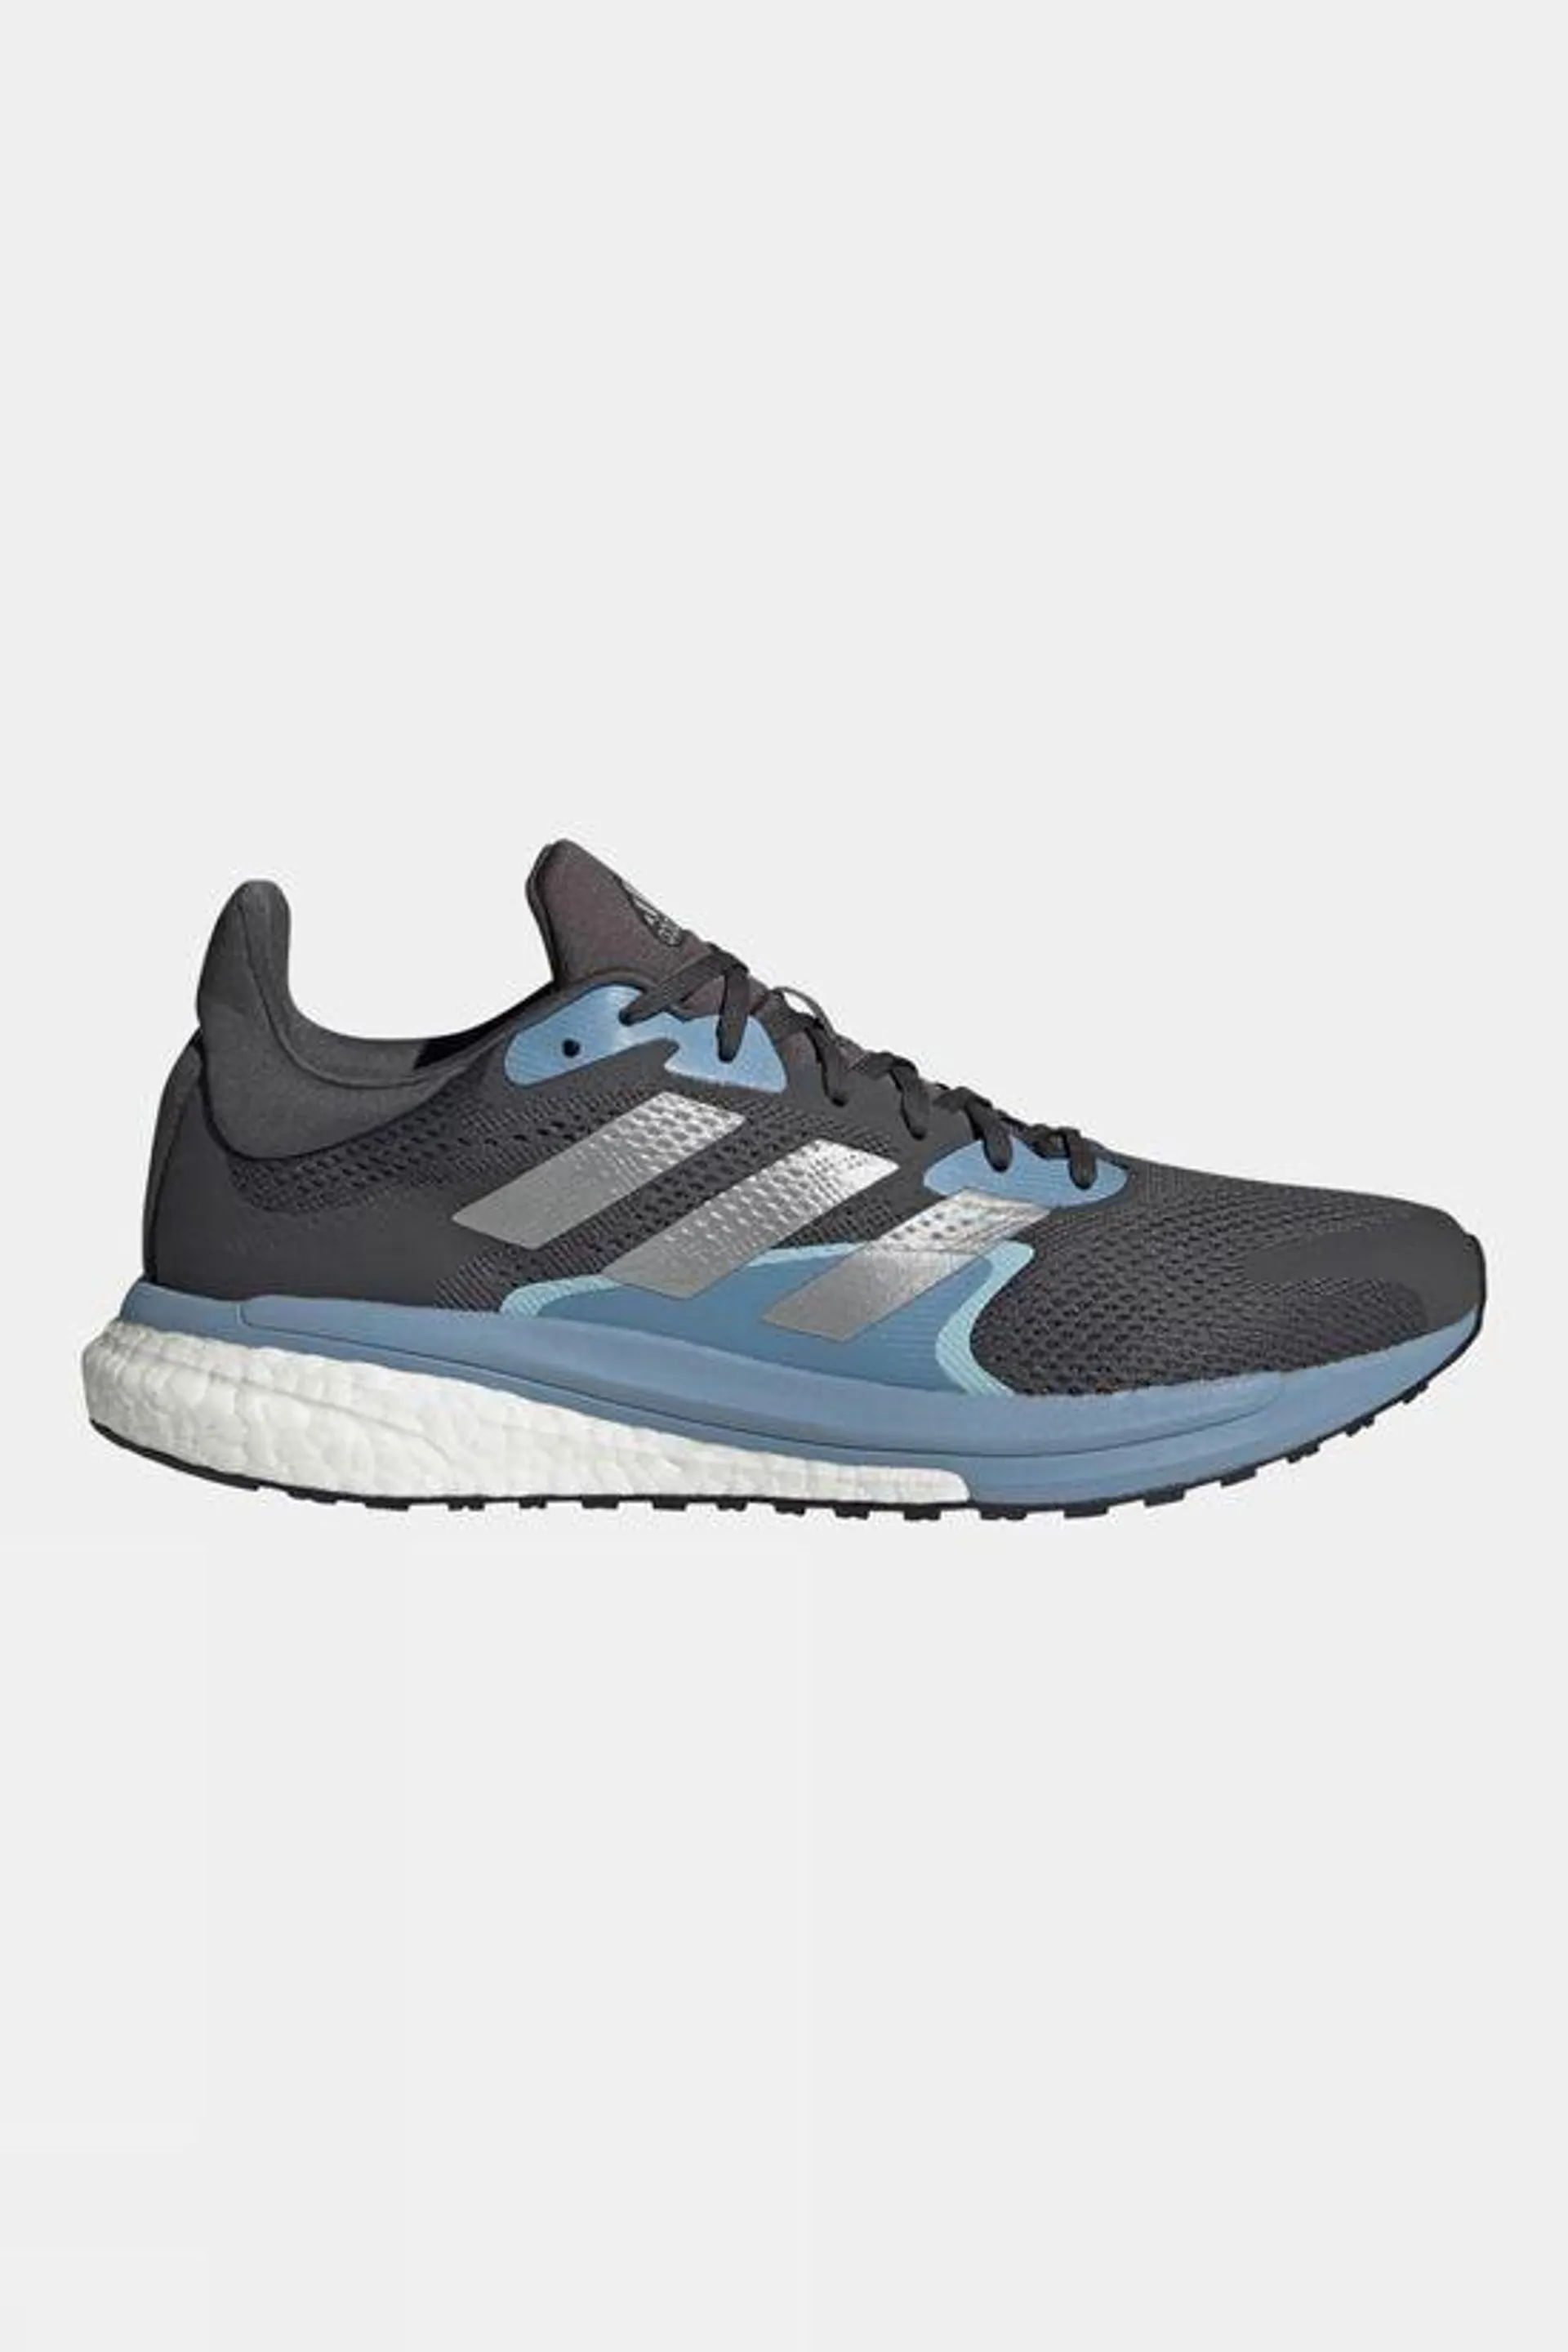 Adidas Mens Solarcharge Shoes